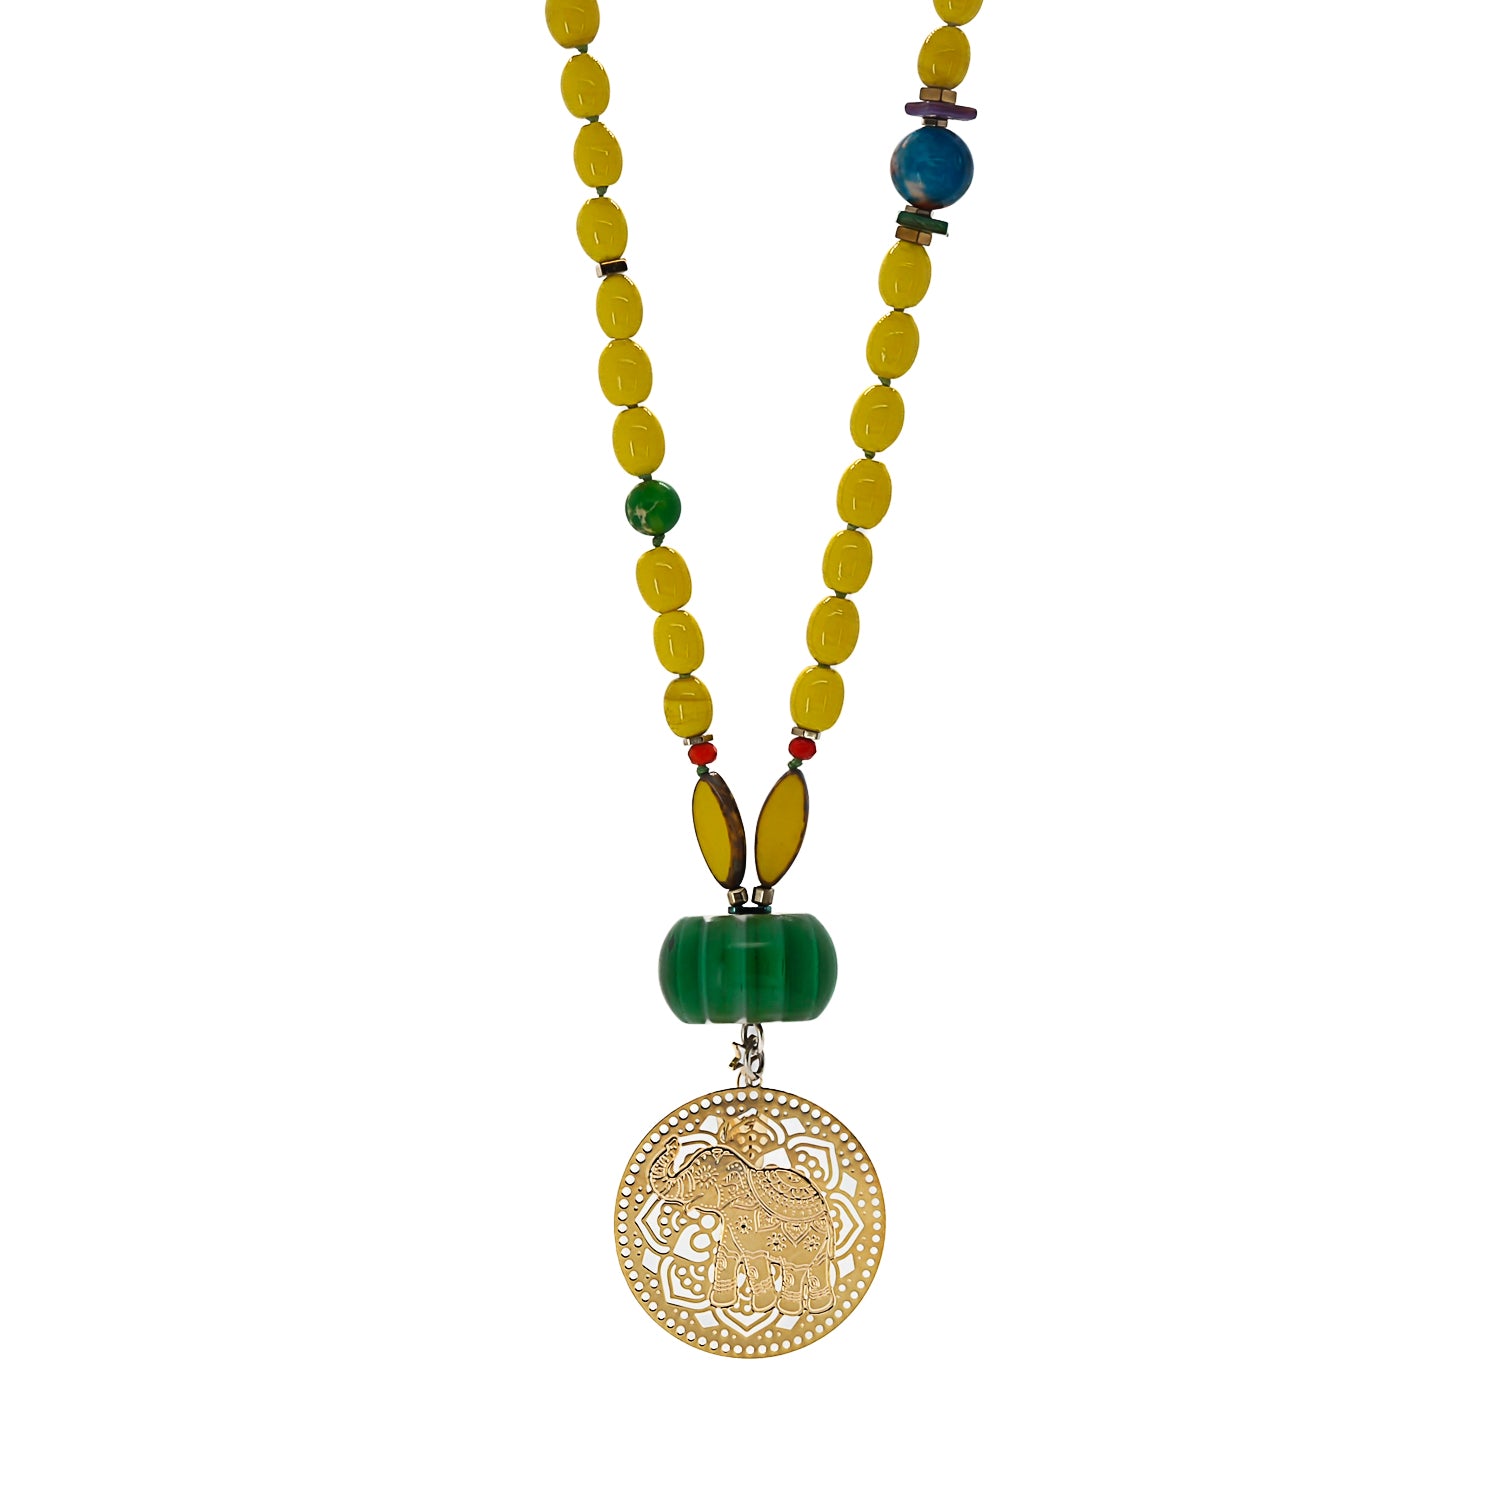 Sunshine Safari Elephant Necklace - A jubilant creation inspired by Africa's vibrant landscapes.